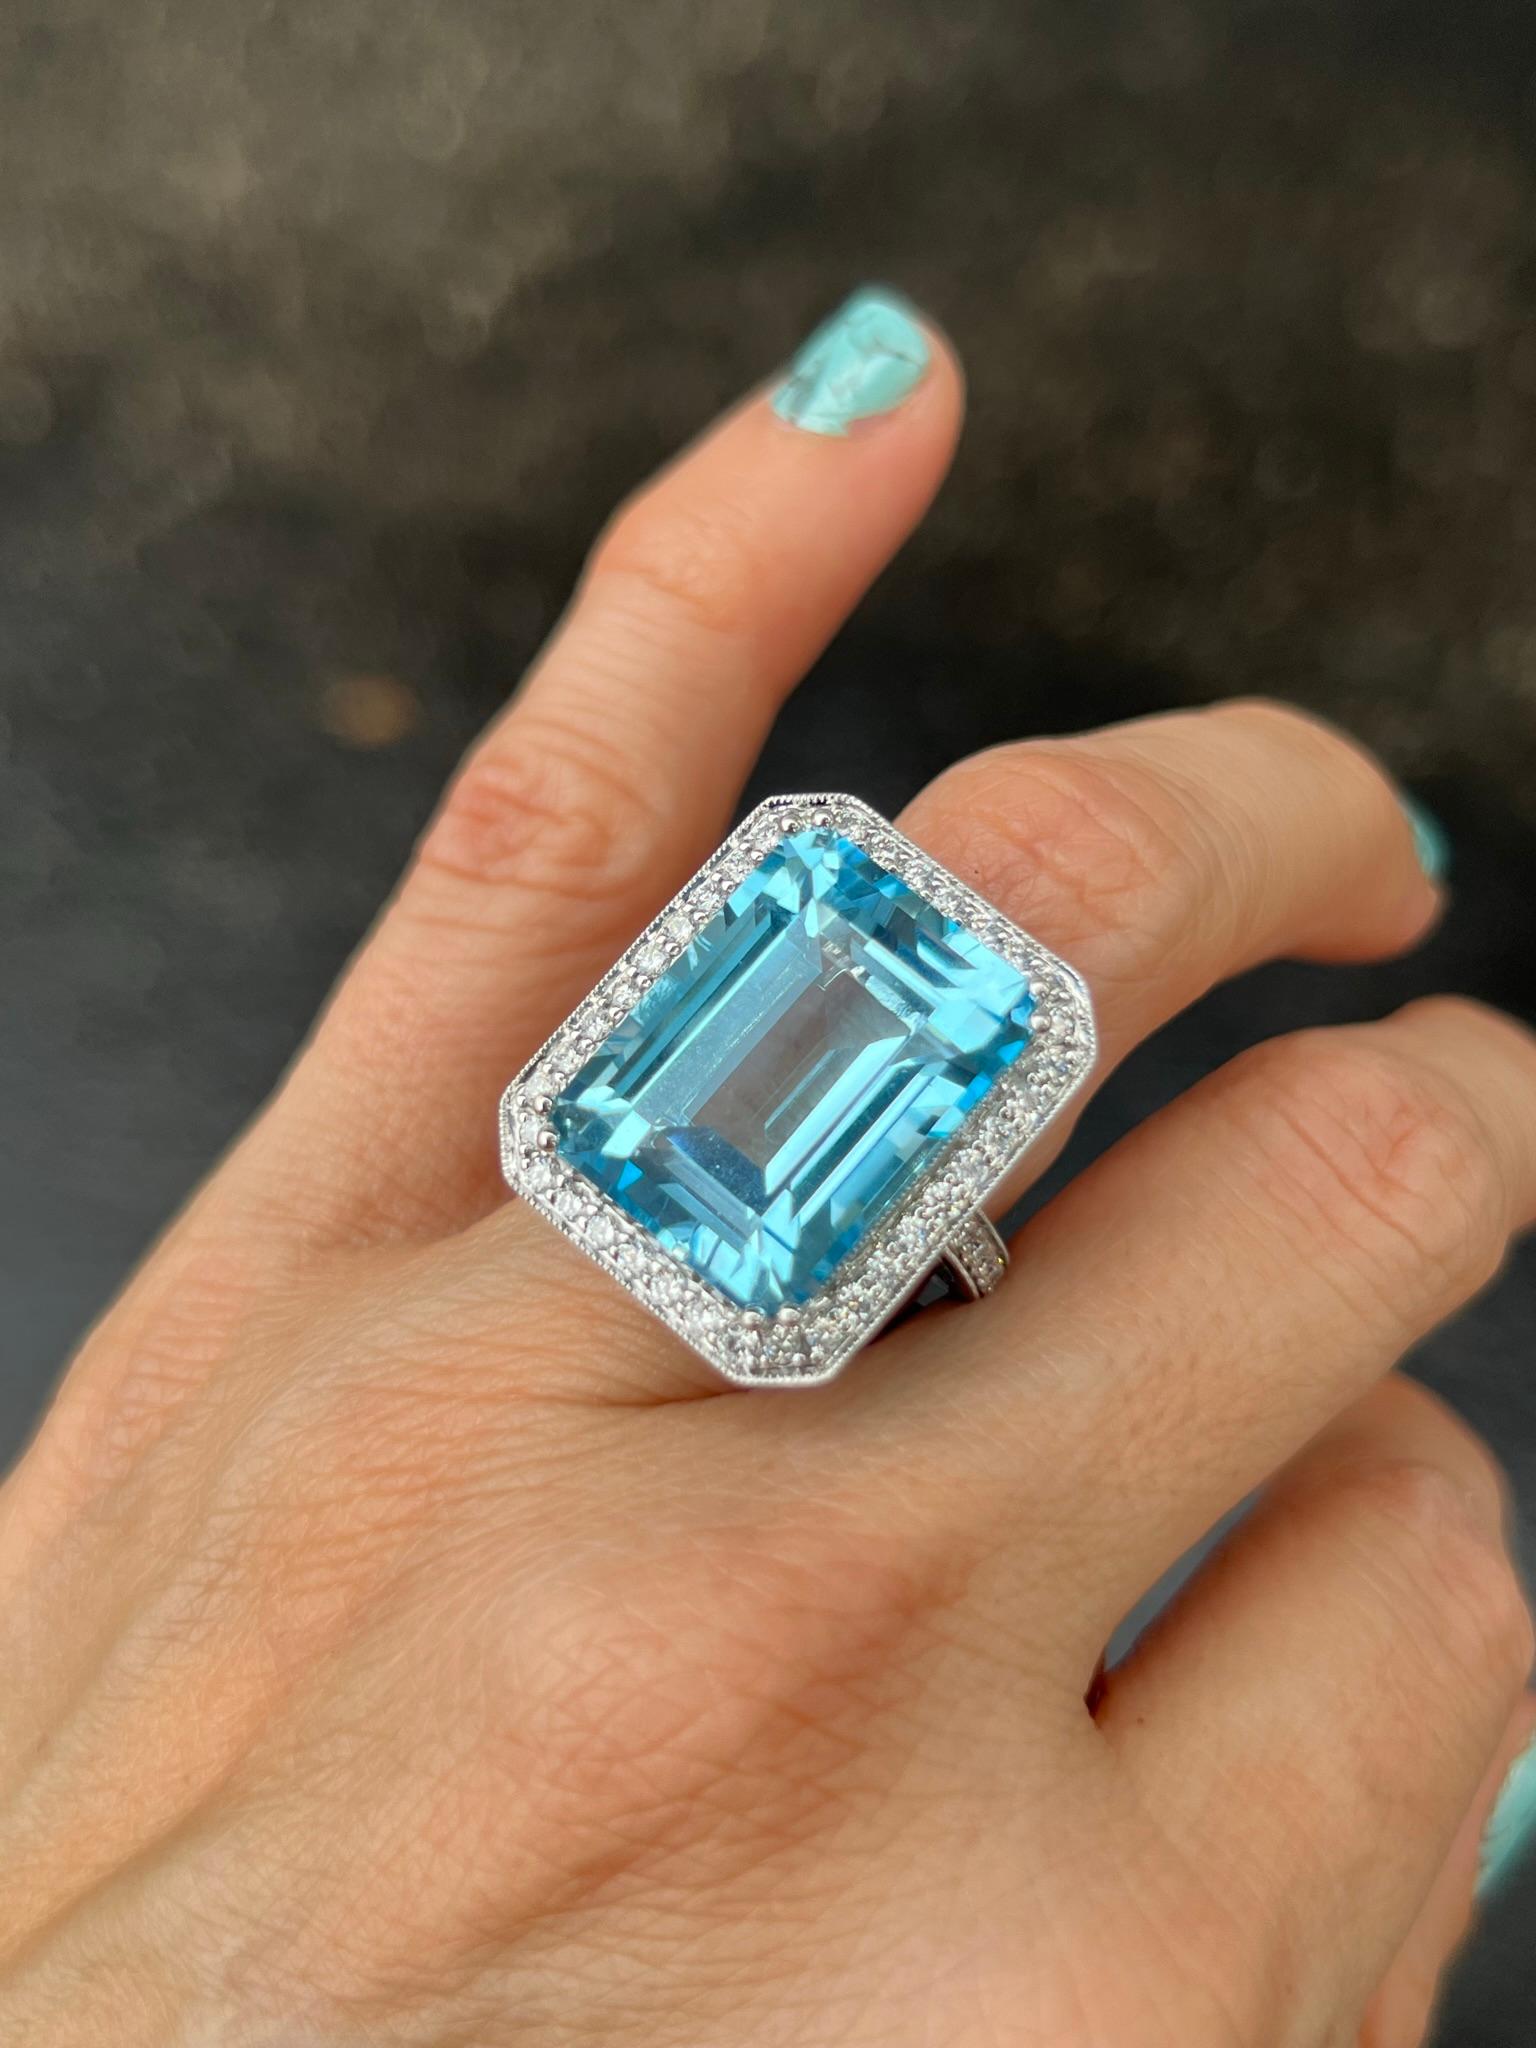 14K white gold cocktail ring with 26.75 carat emerald cut blue topaz.

Features
14K white gold
26.75 carat Swiss Blue, blue topaz with an emerald cut
1 carat total weight in diamonds
The measurement of the blue topaz stone is aprrox. 20 x 15 mm
The